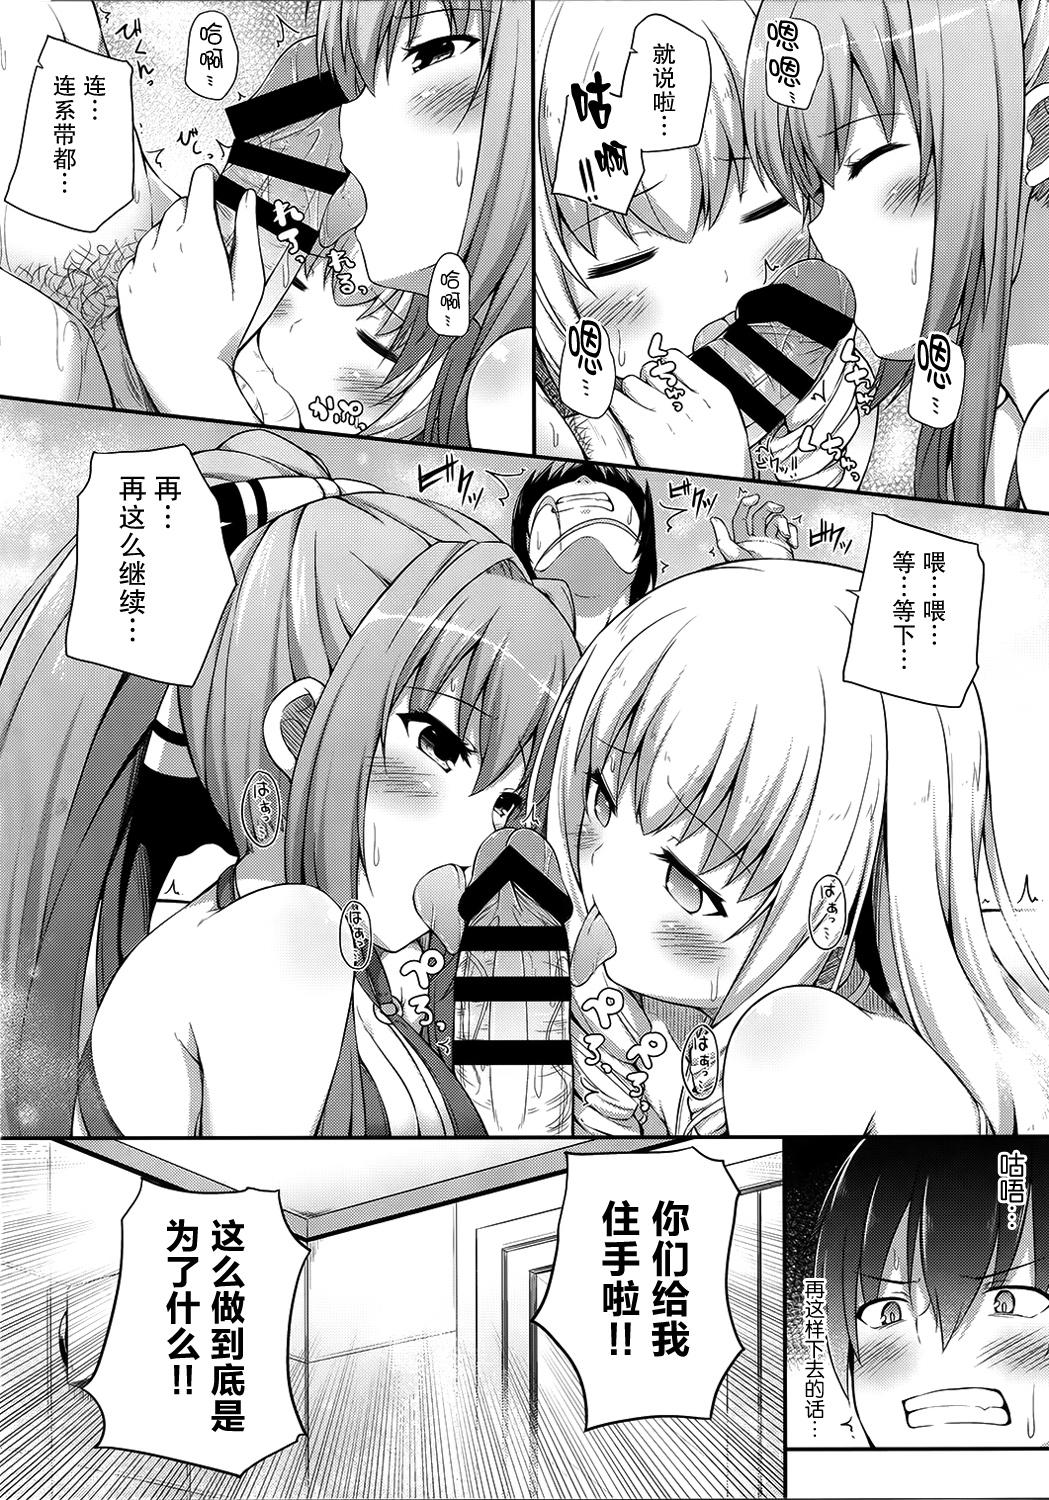 Peeing Brilliant Holiday - Amagi brilliant park Porn Pussy - Page 9